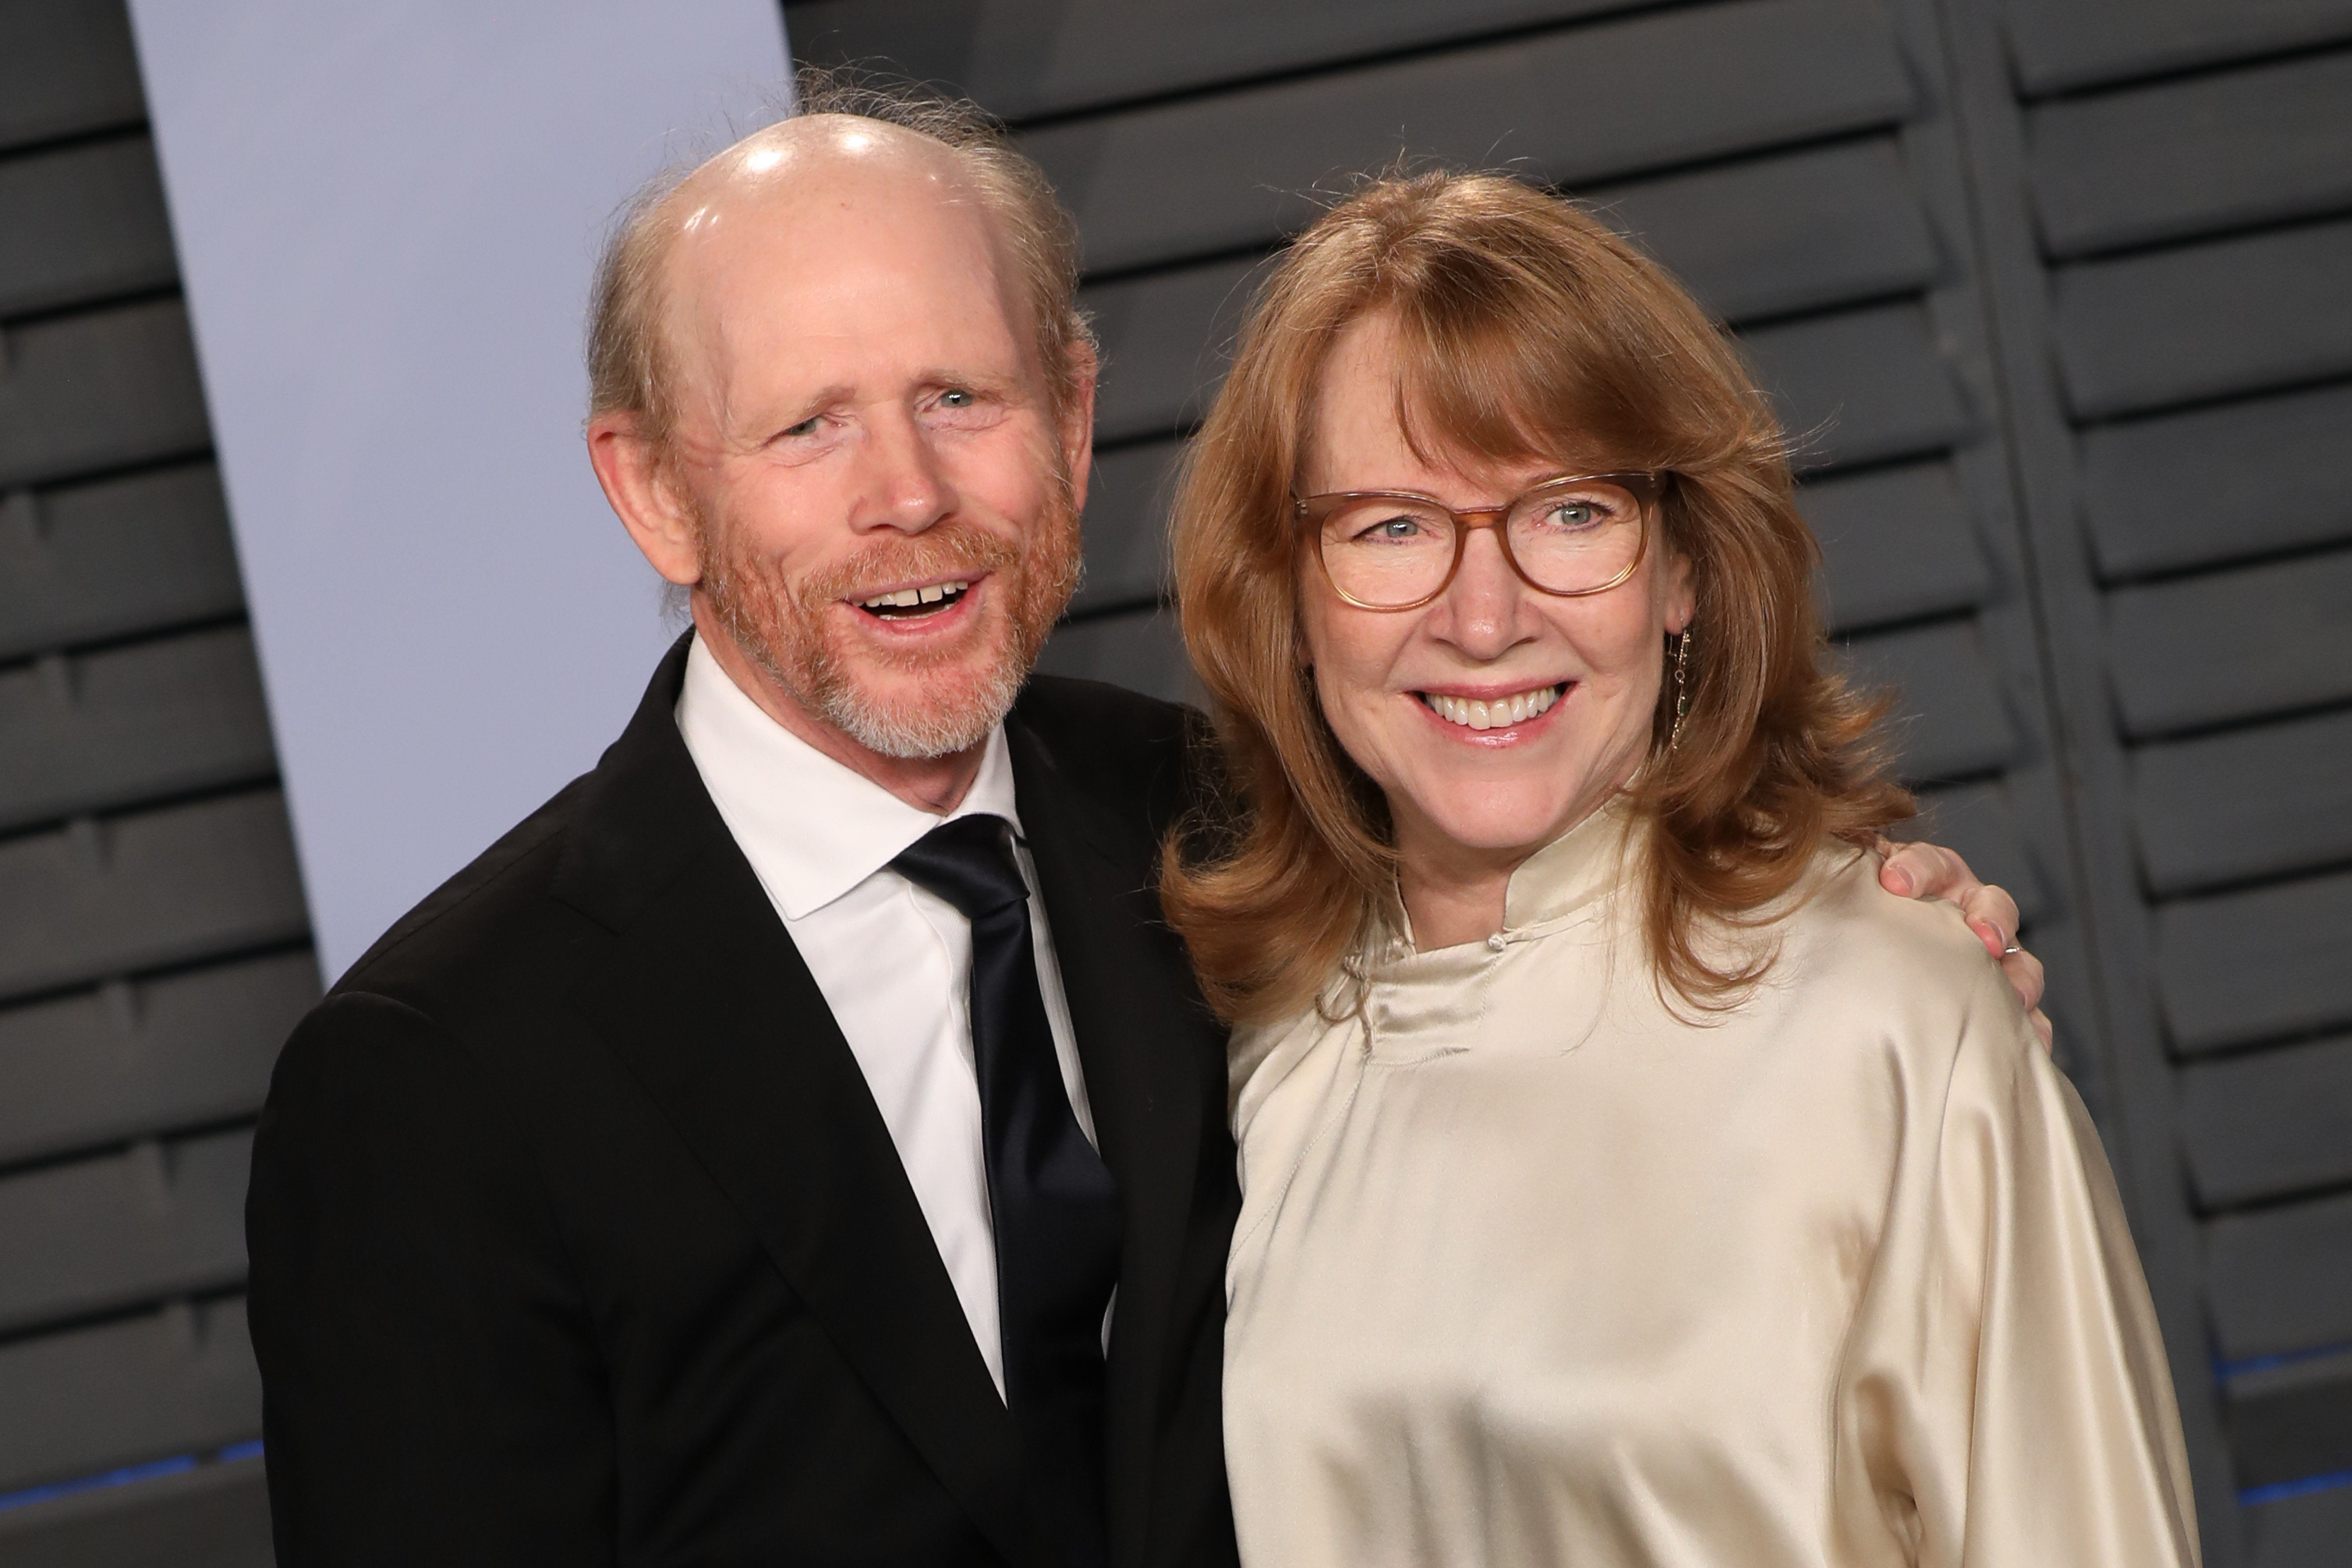 Ron Howard and Cheryl Howard attend the 2018 Vanity Fair Oscar Party hosted by Radhika Jones at Wallis Annenberg Center for the Performing Arts on March 04, 2018 in Beverly Hills, California. | Source: Getty Images